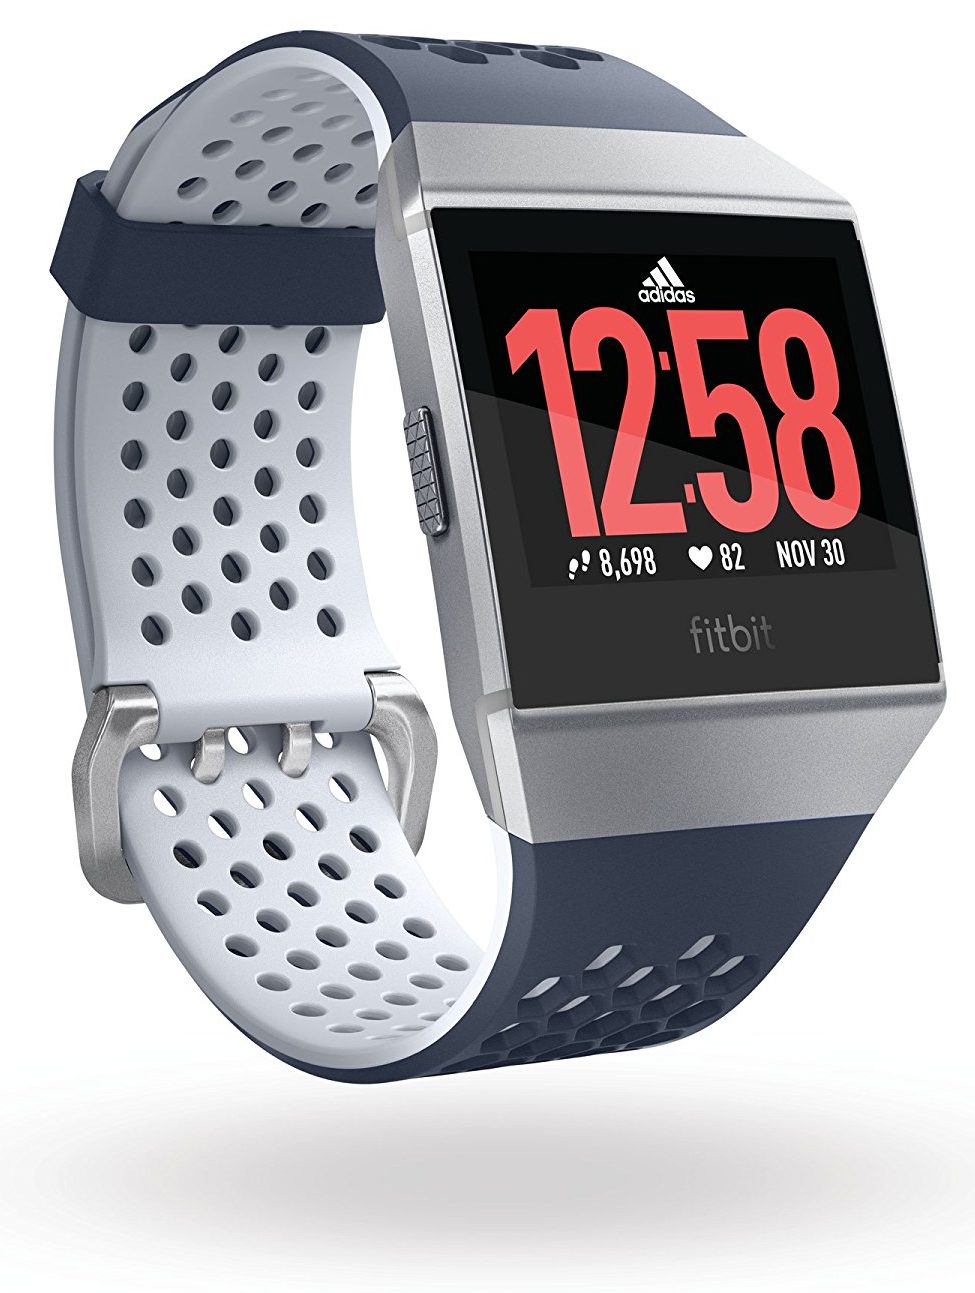 Best Gifts for Runners 2018: Adidas Fitbit Fitness Tracker